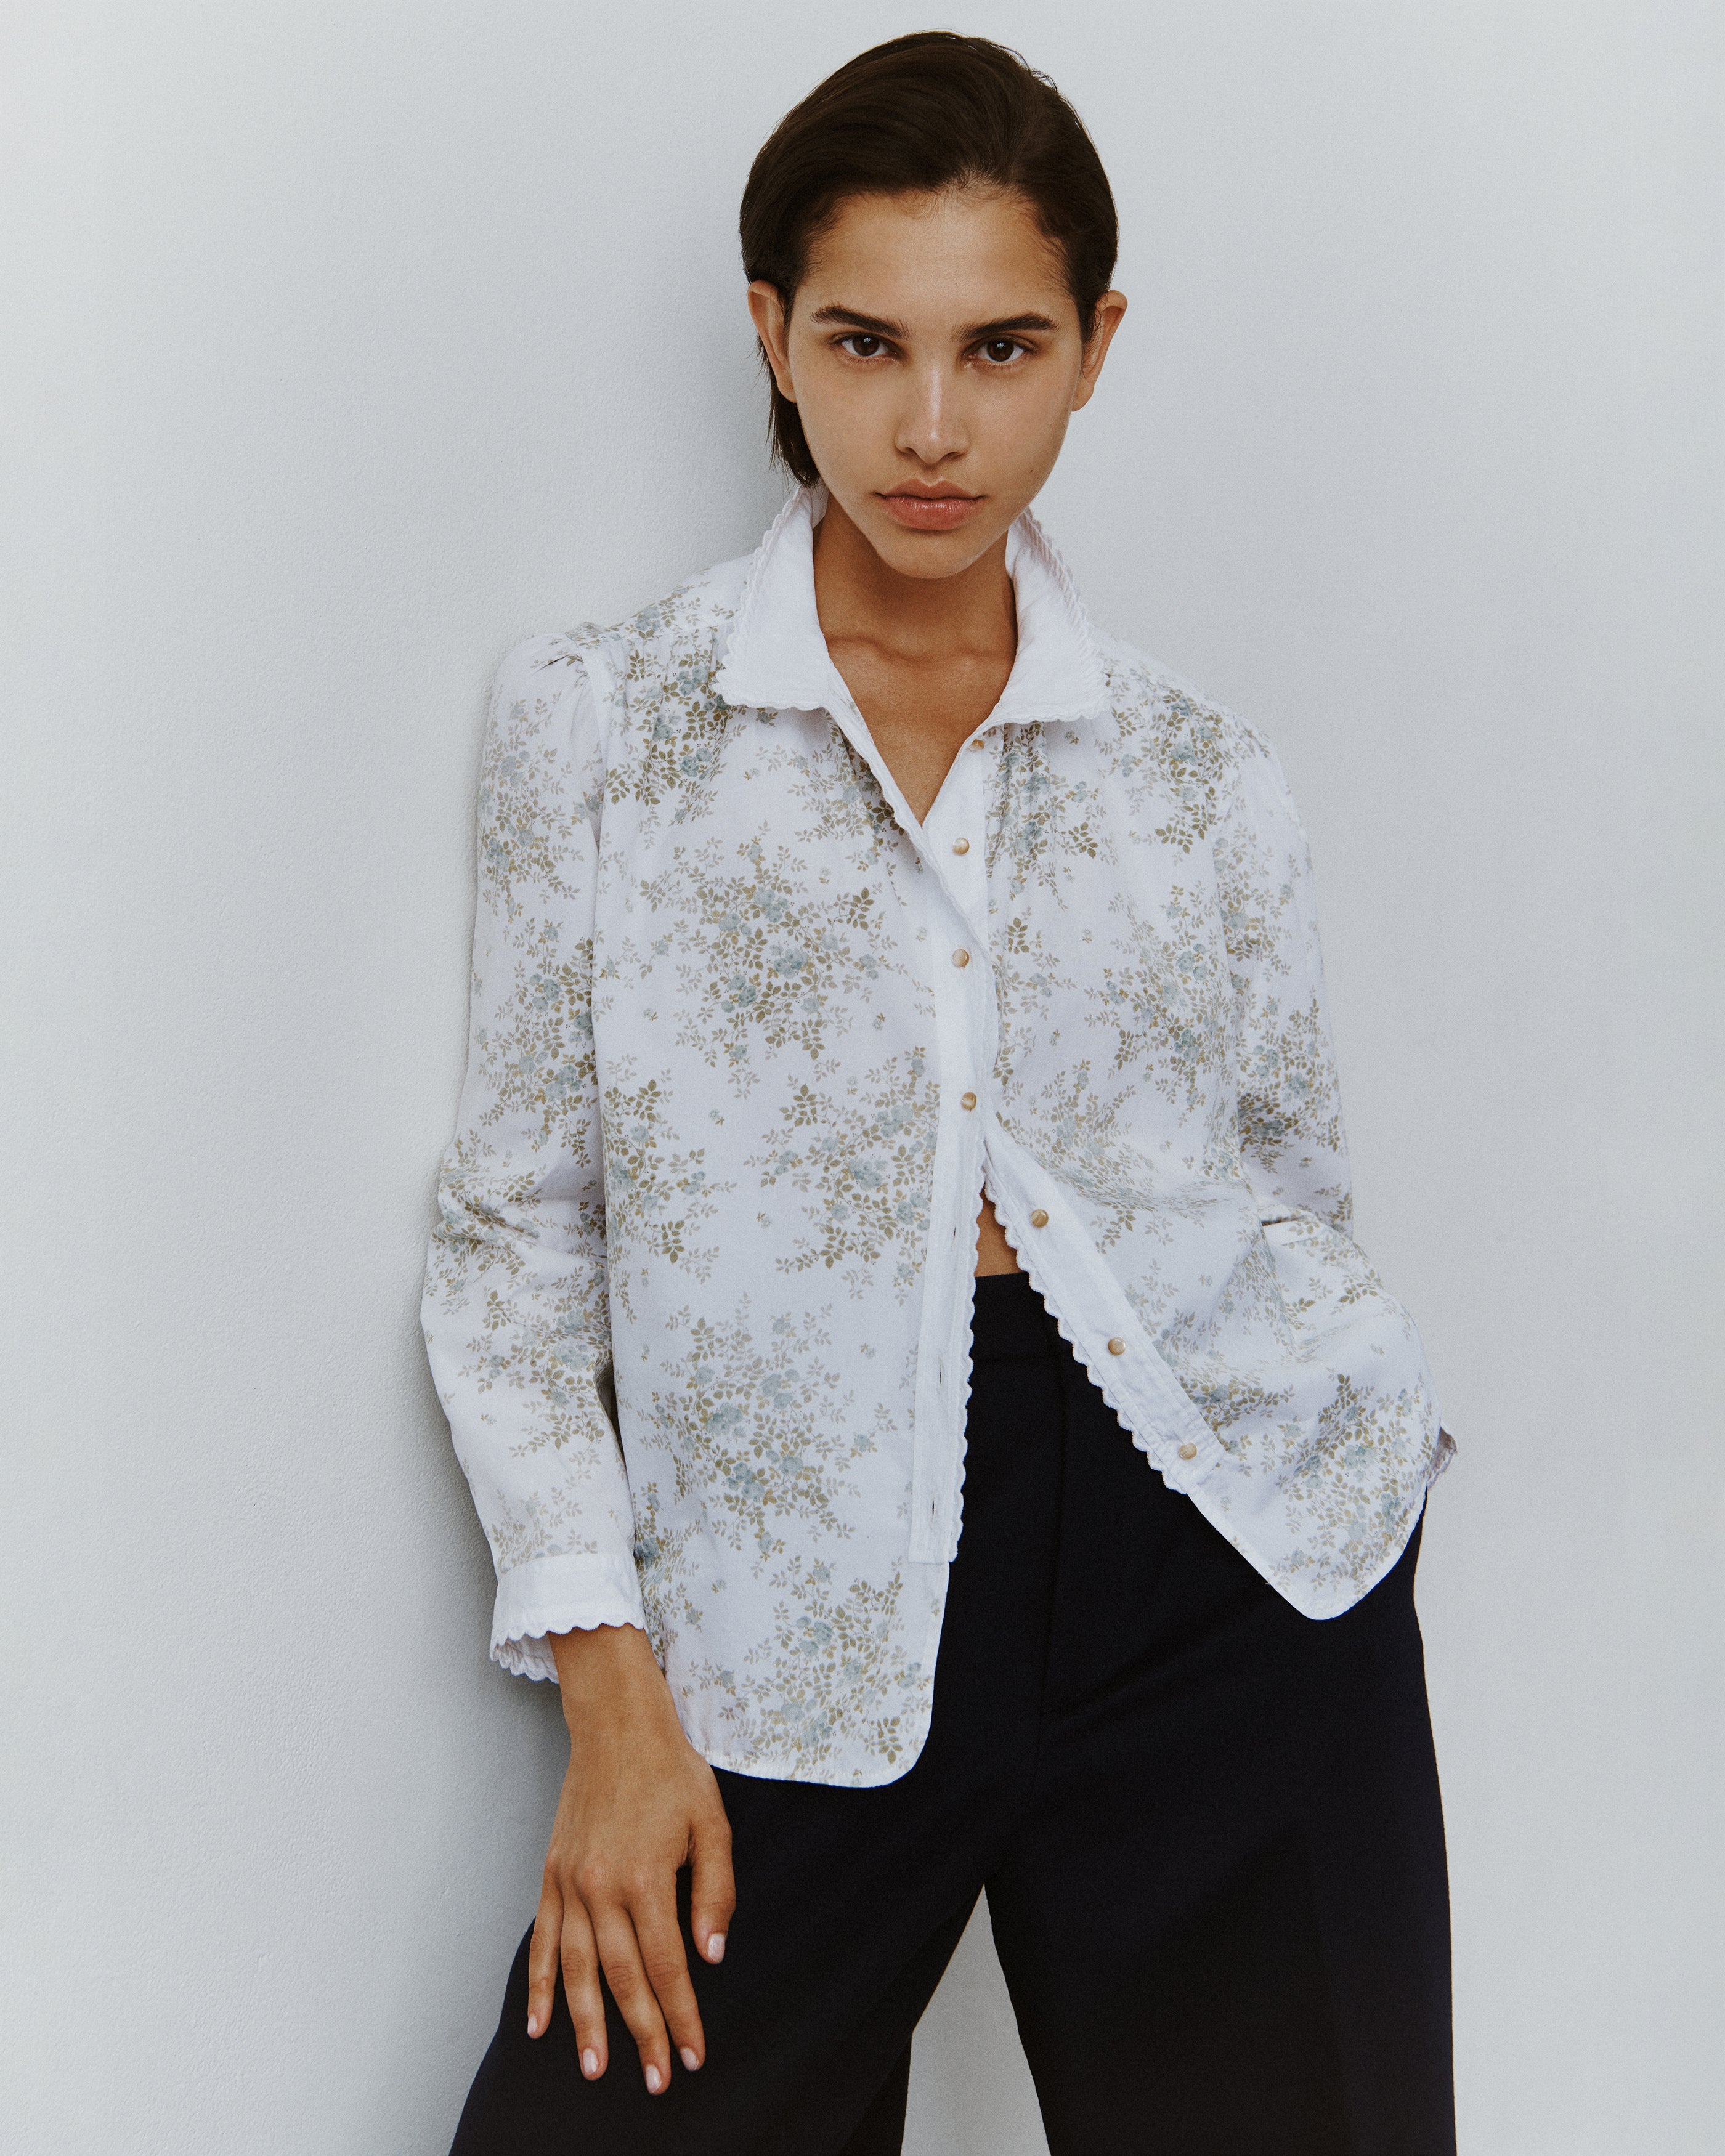 Close-up of a brunette woman wearing a partially unbuttoned floral cotton blouse with eyelet trim over a pair of black slacks.